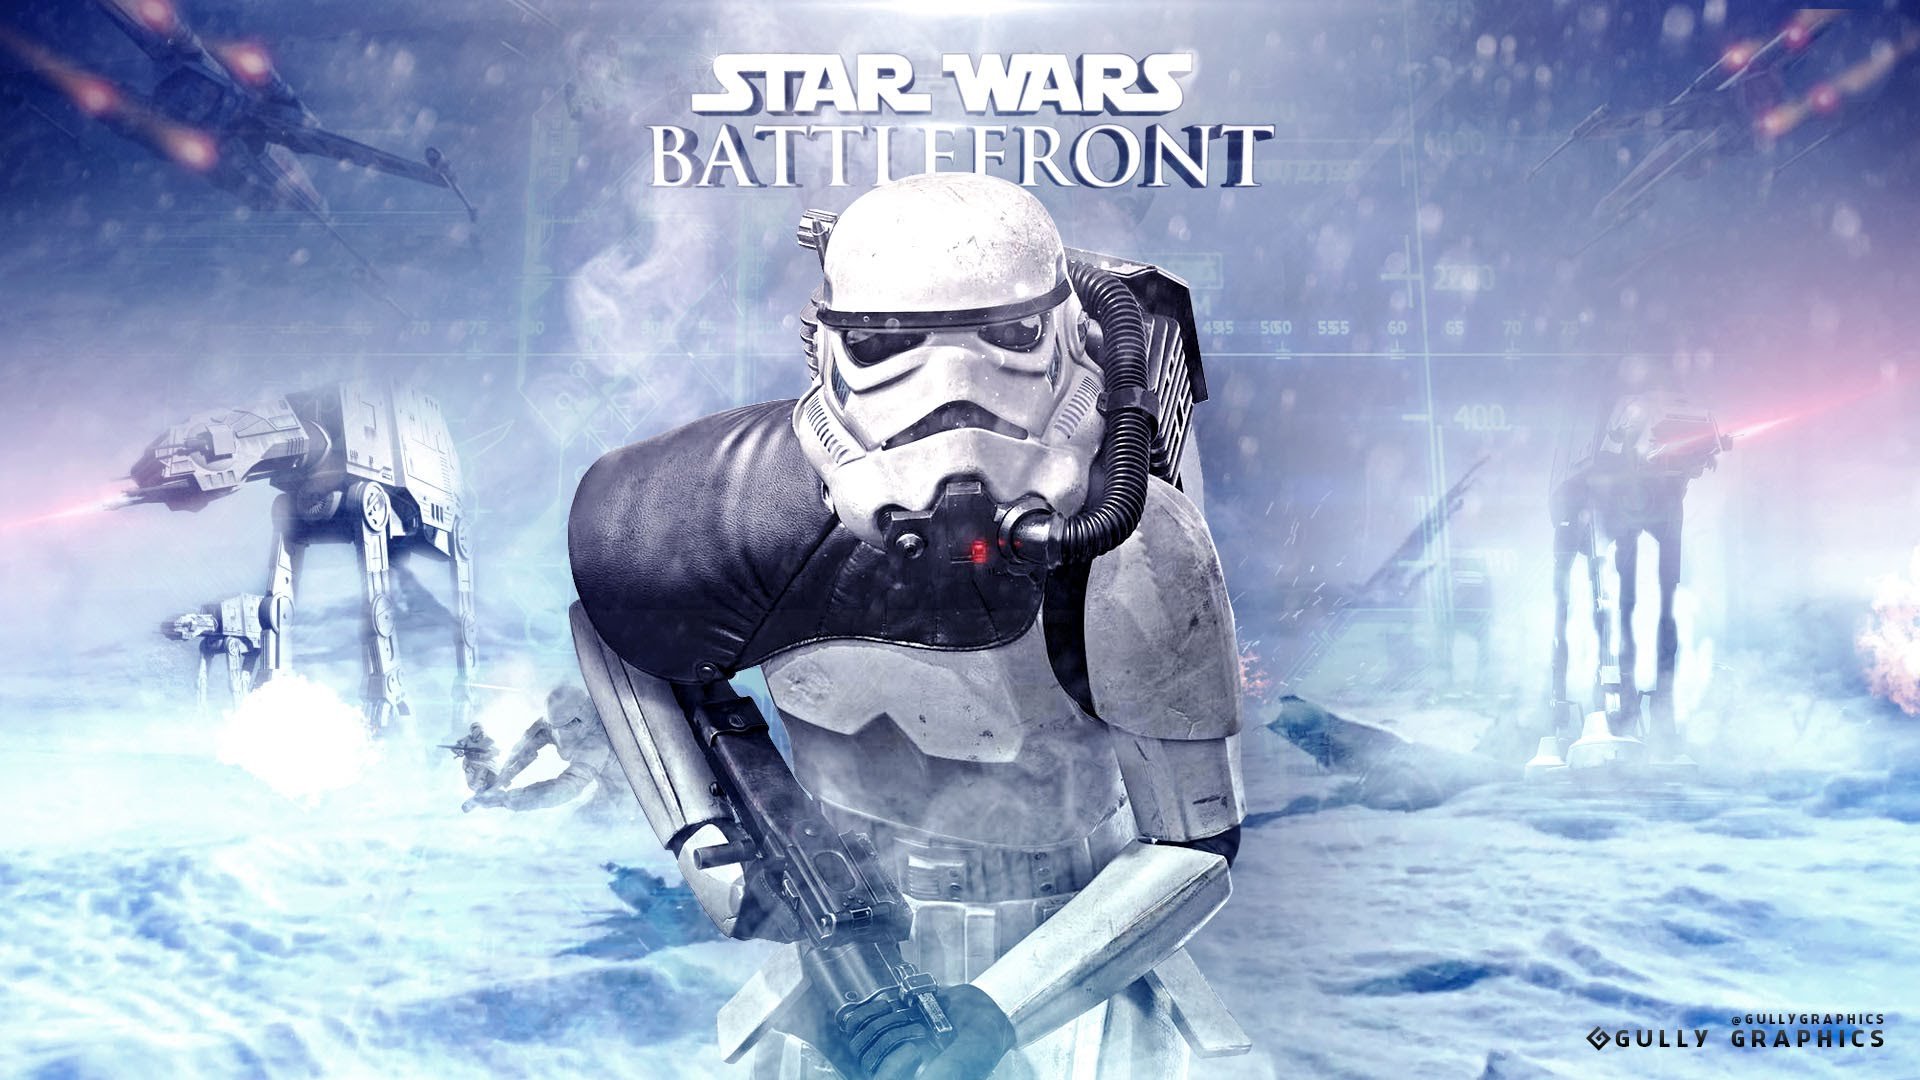 star, Wars, Battlefront, Sci fi, 1swbattlefront, Action, Fighting, Futuristic, Shooter, Poster Wallpaper